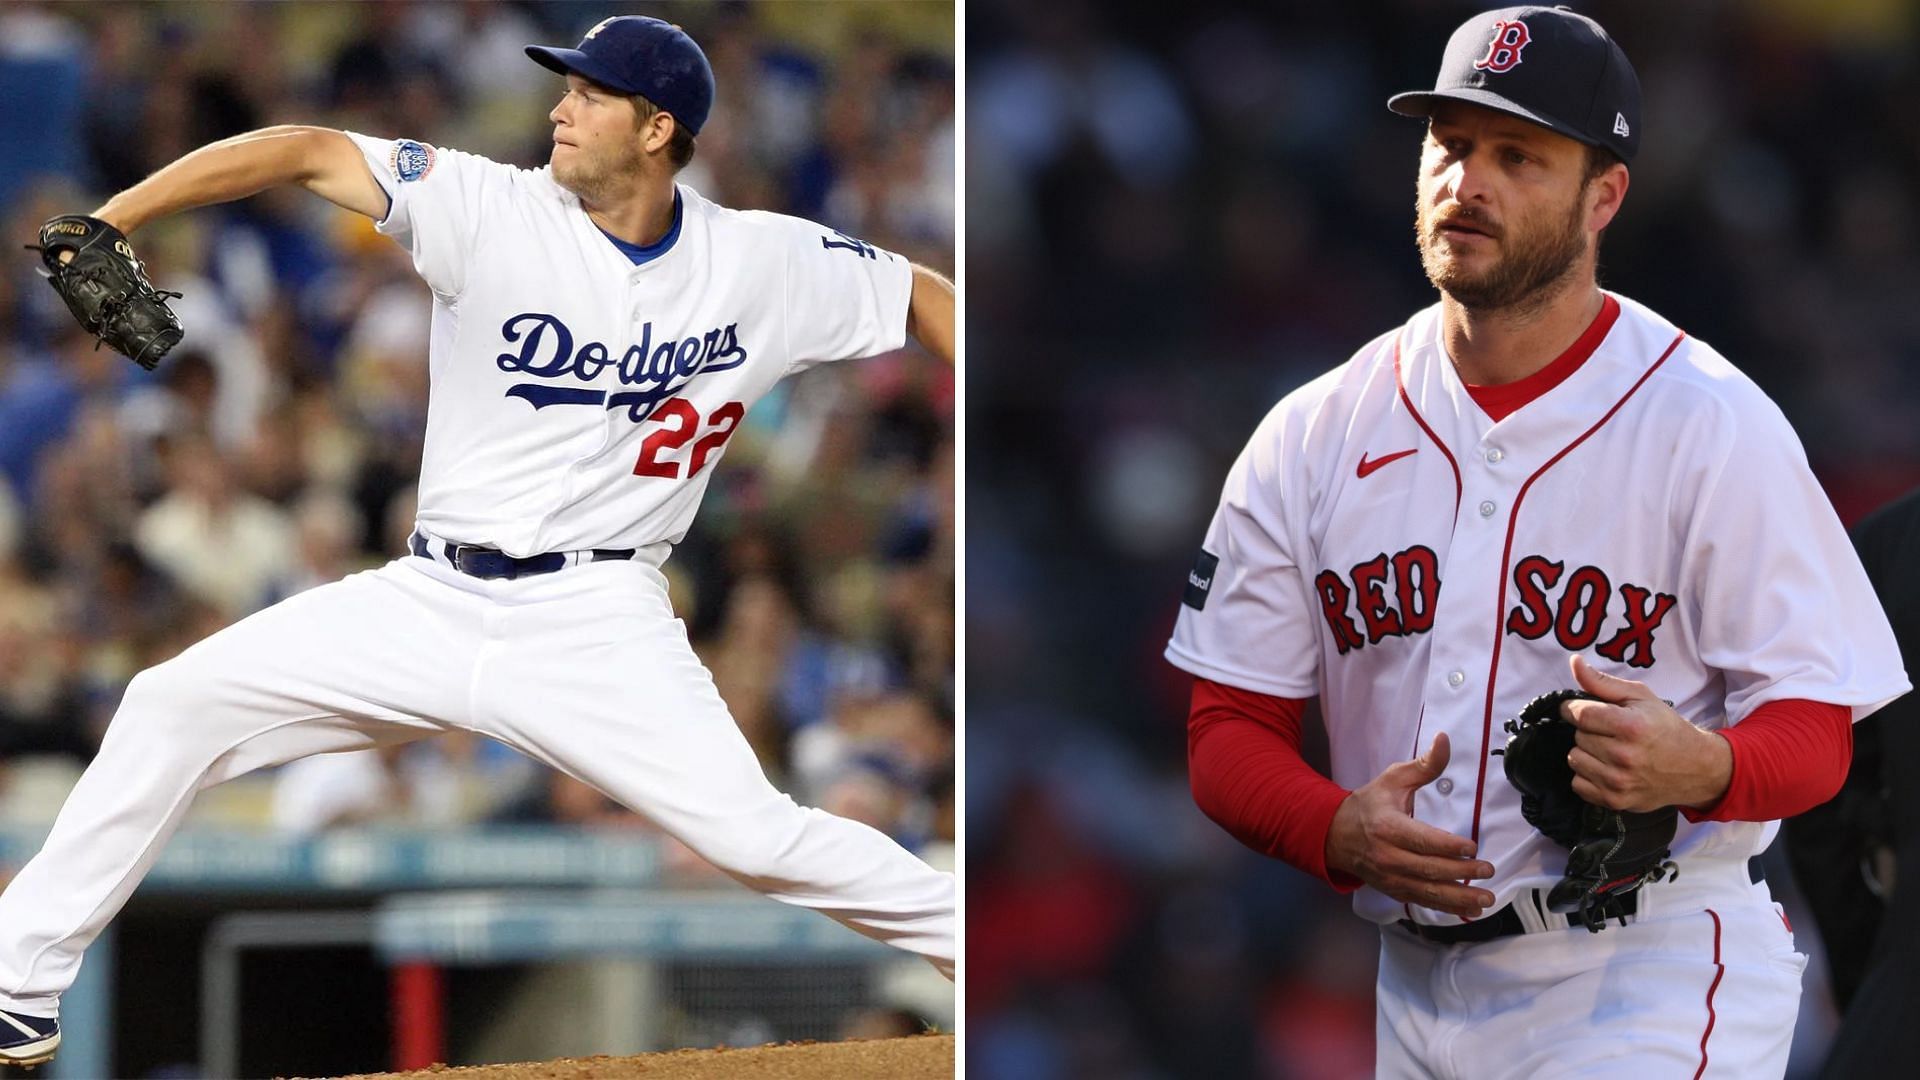 The 2018 World Series game between Boston Red Sox and Los Angeles Dodgers is the longest MLB game